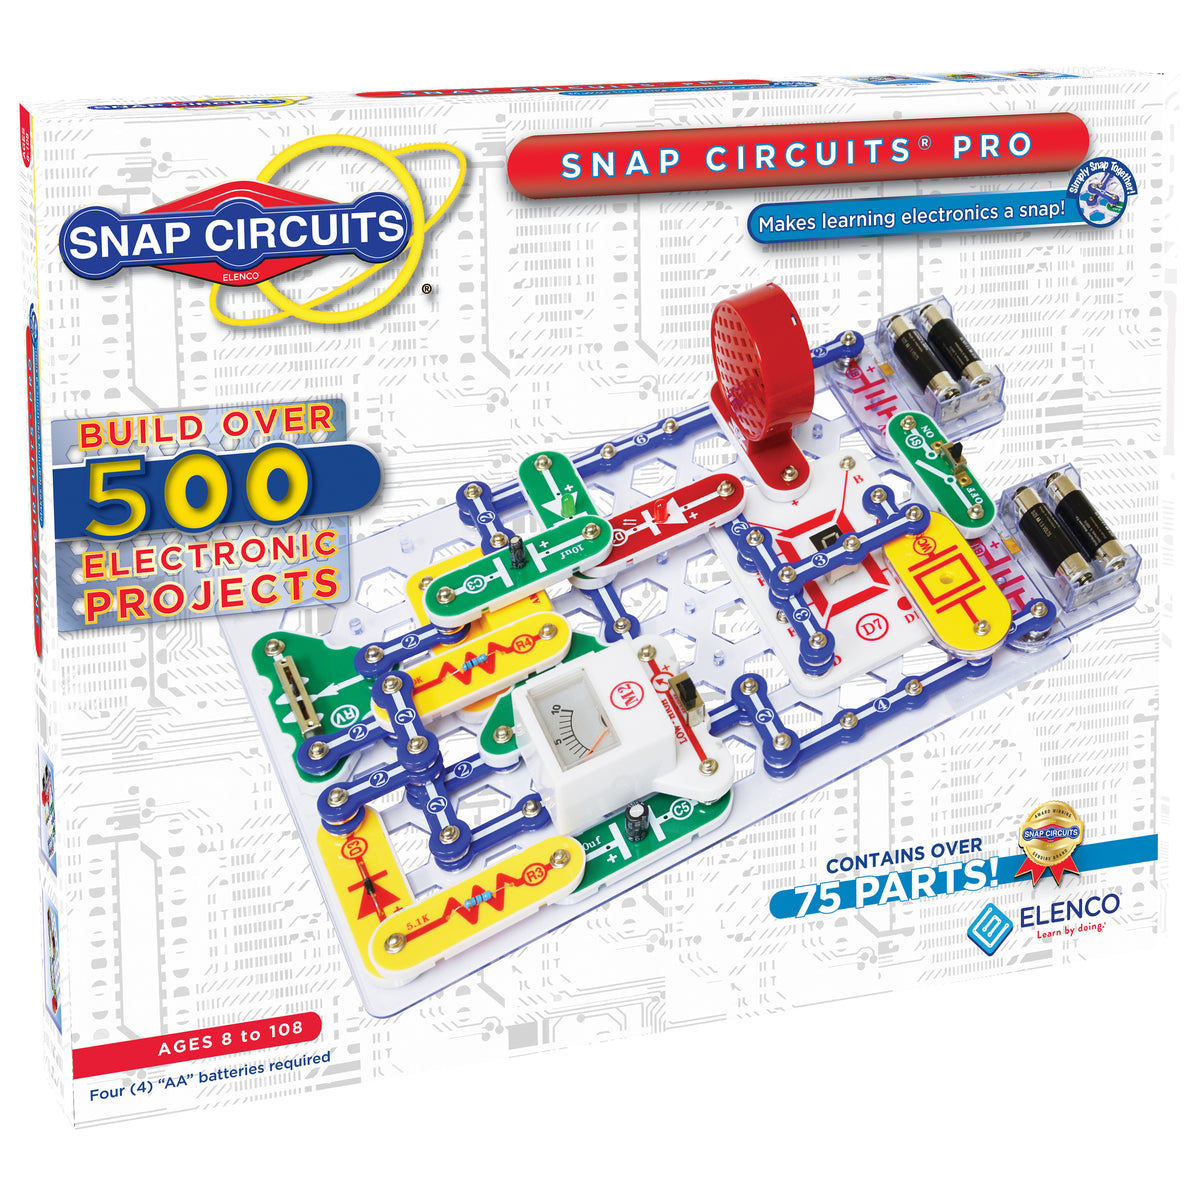 Snap Circuits Pro Plus Over 500 Projects